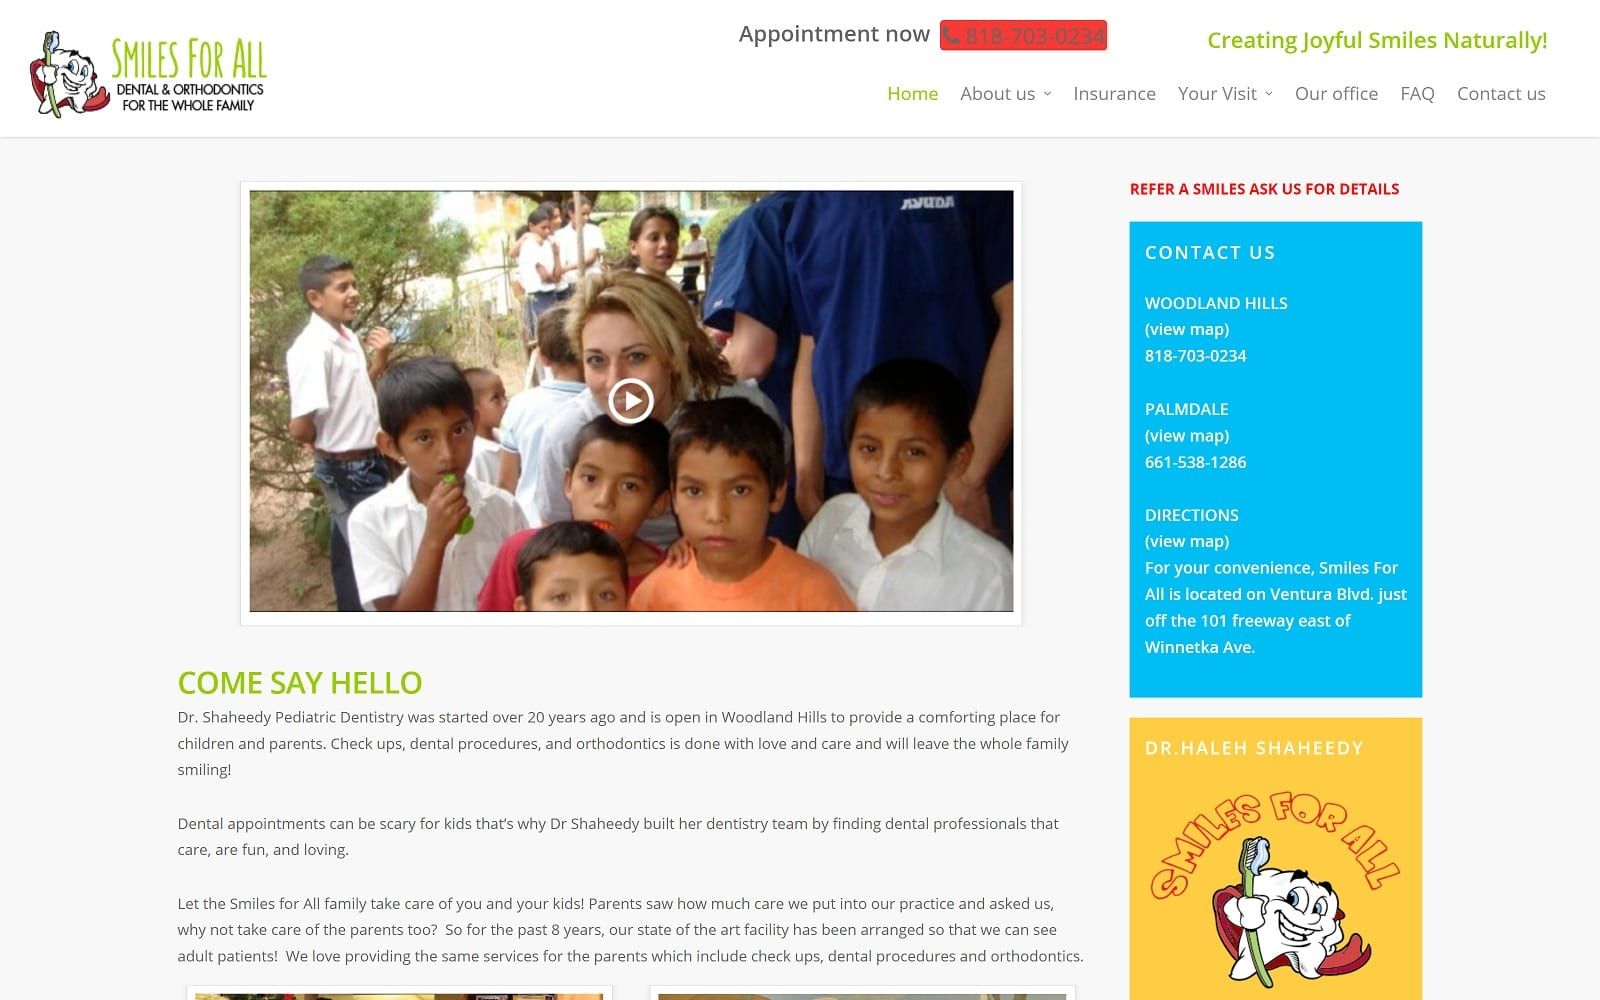 The screenshot of smiles for all smilesforall. Net dr. Shaheedy website